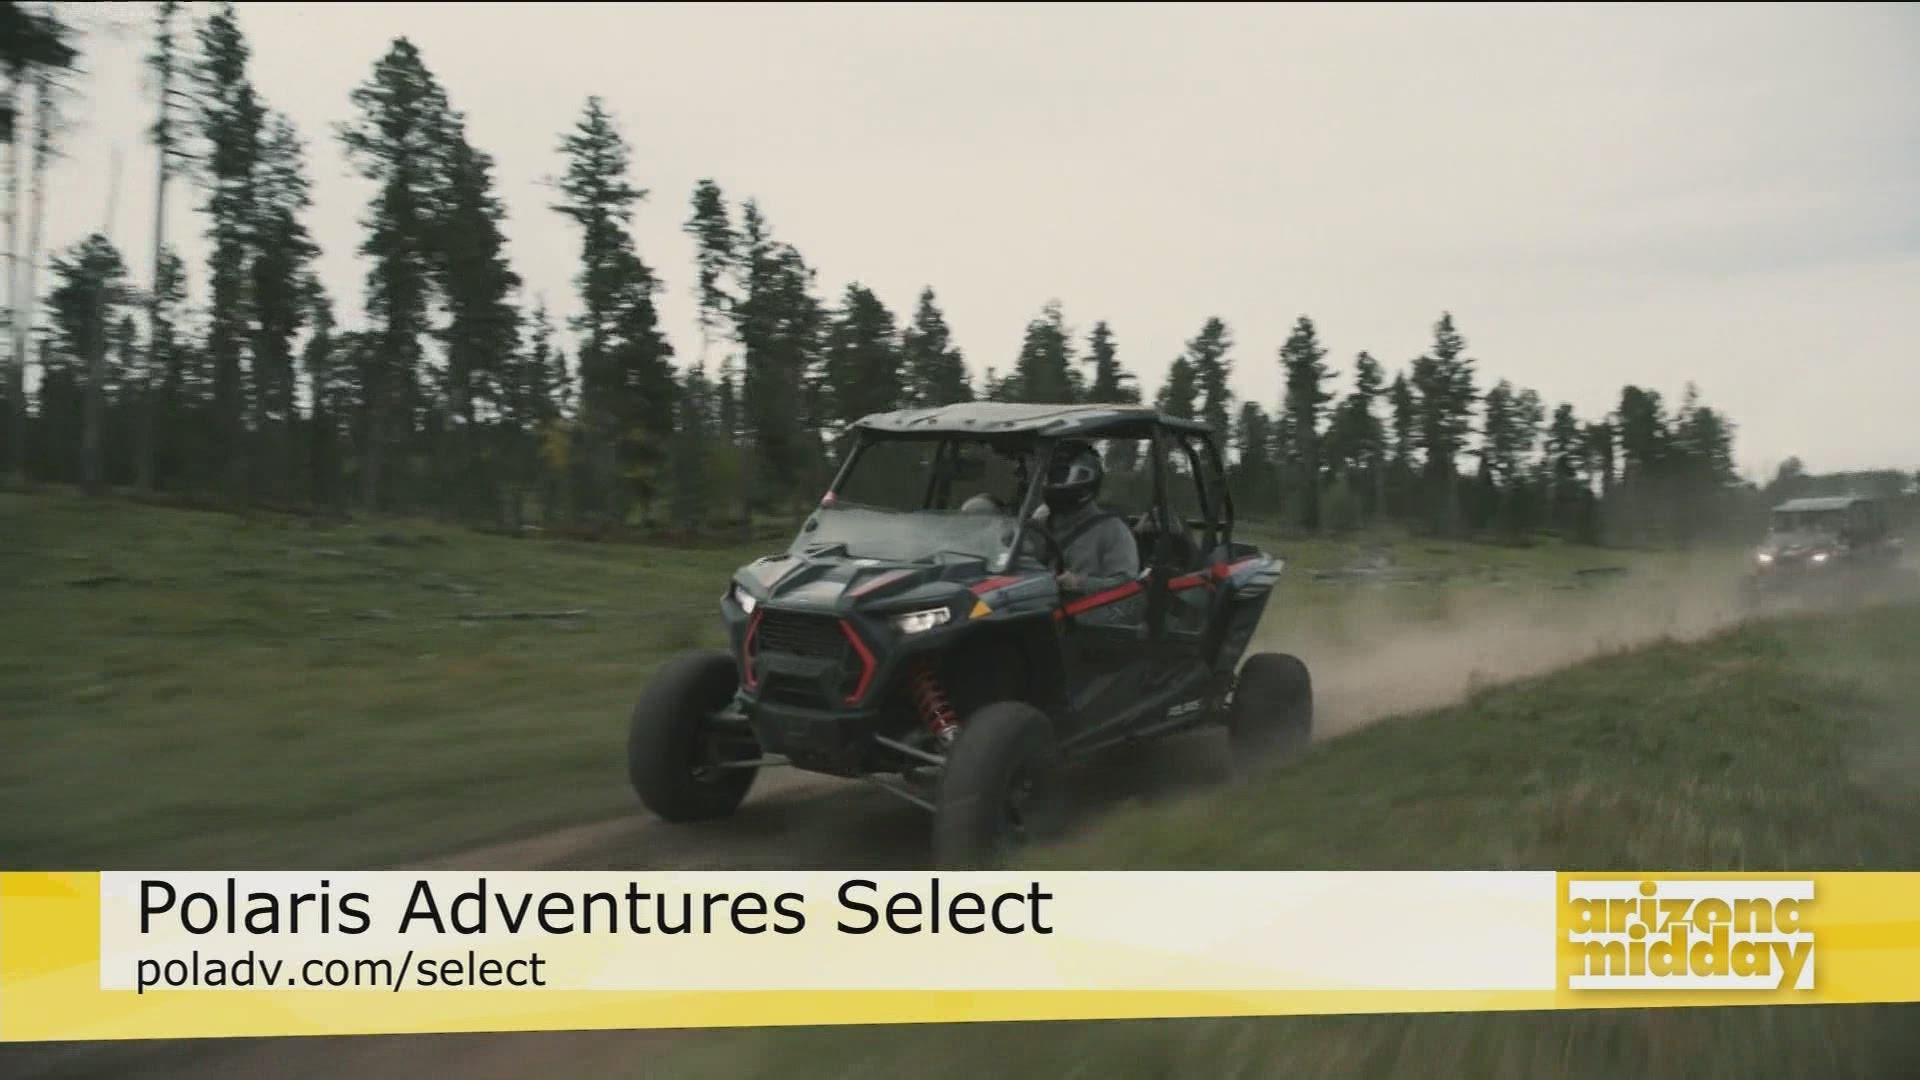 Nila Norman tells us about the Polaris Adventures Select membership program that gives you access to ATVs, Side by Sides and Slingshots.